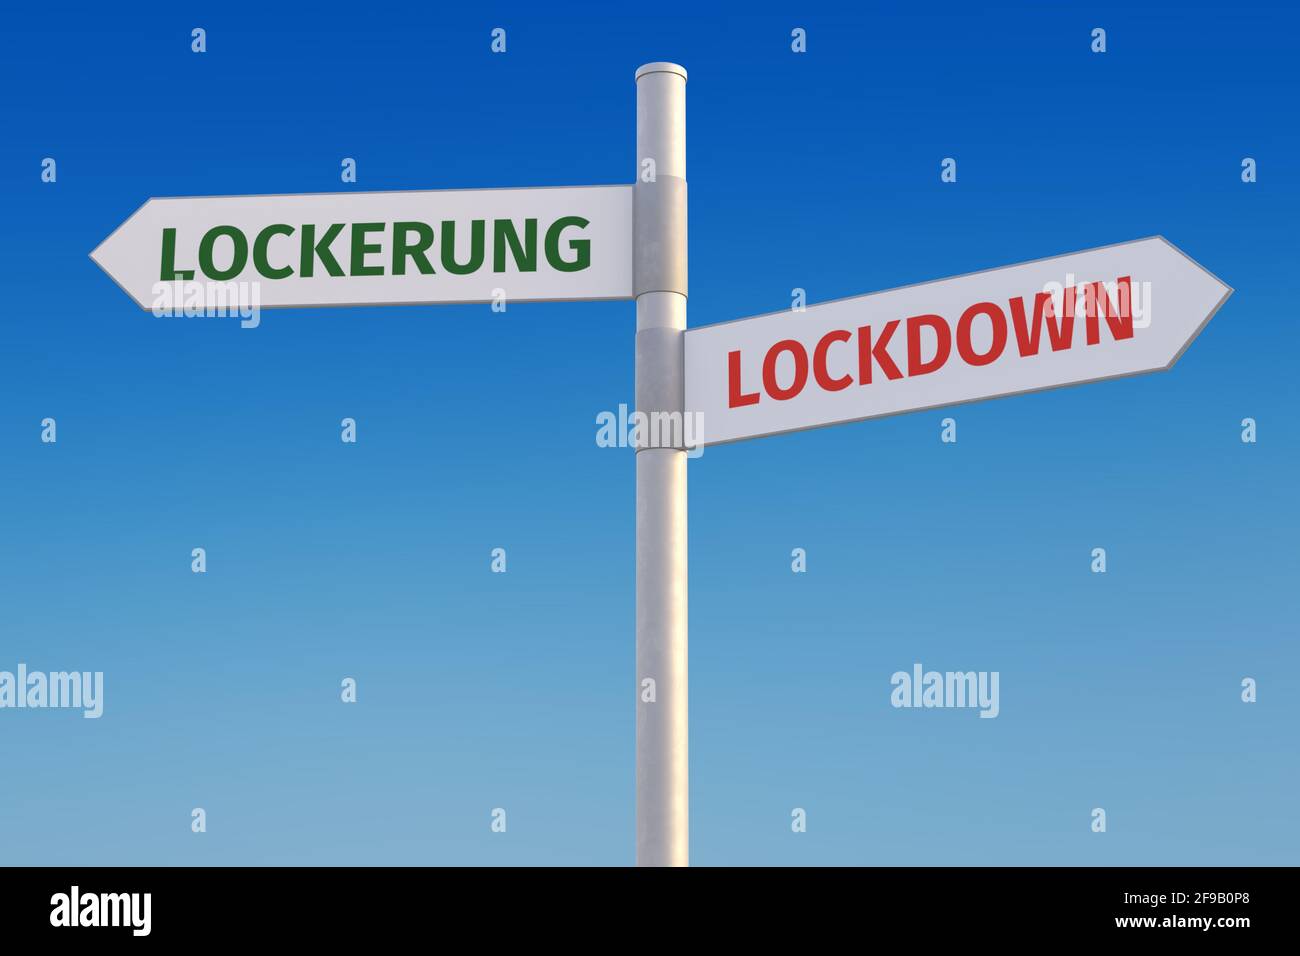 Corona crisis concept (German text): Lockdown or 'Lockerung' (limited reopening) - two contrarian strategies symbolized by two street signs against a Stock Photo